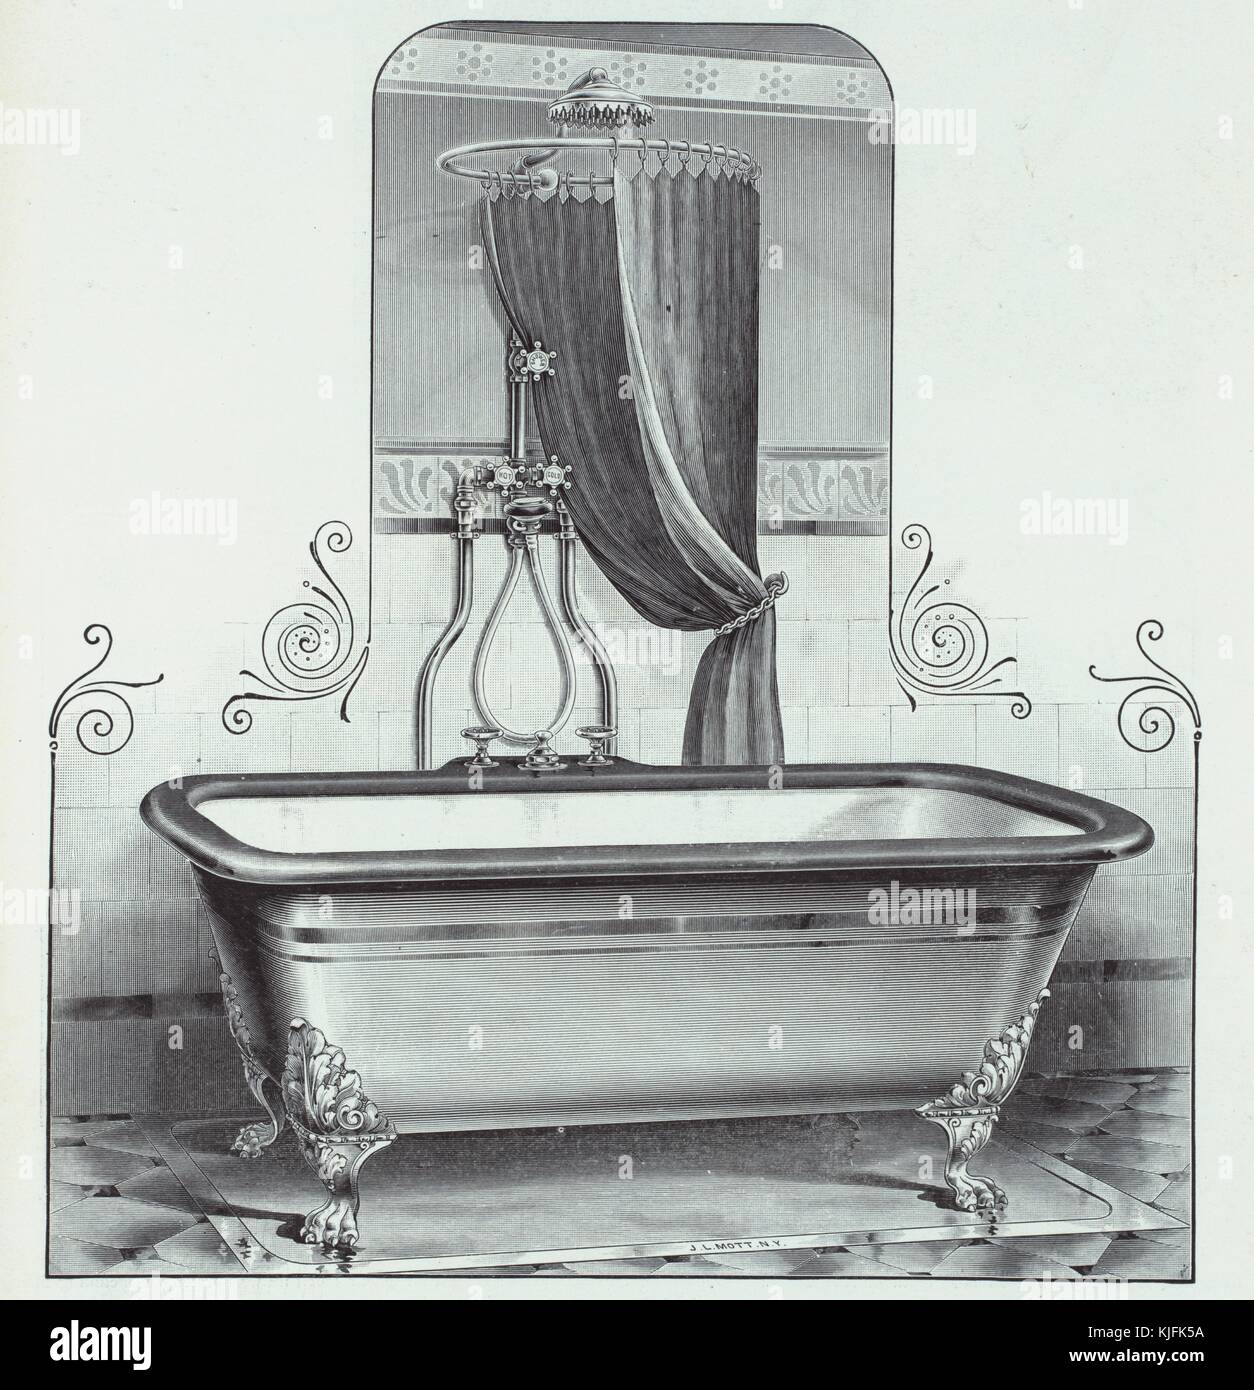 Illustration for an advertisement, showing a claw foot tub with fittings for a shower, titled 'Mott's porcelain-lined Roman baths, with supply fittings and unique waste, Plate 1102-G', published by JL Mott Iron Works, New York, 1885. From the New York Public Library. Stock Photo